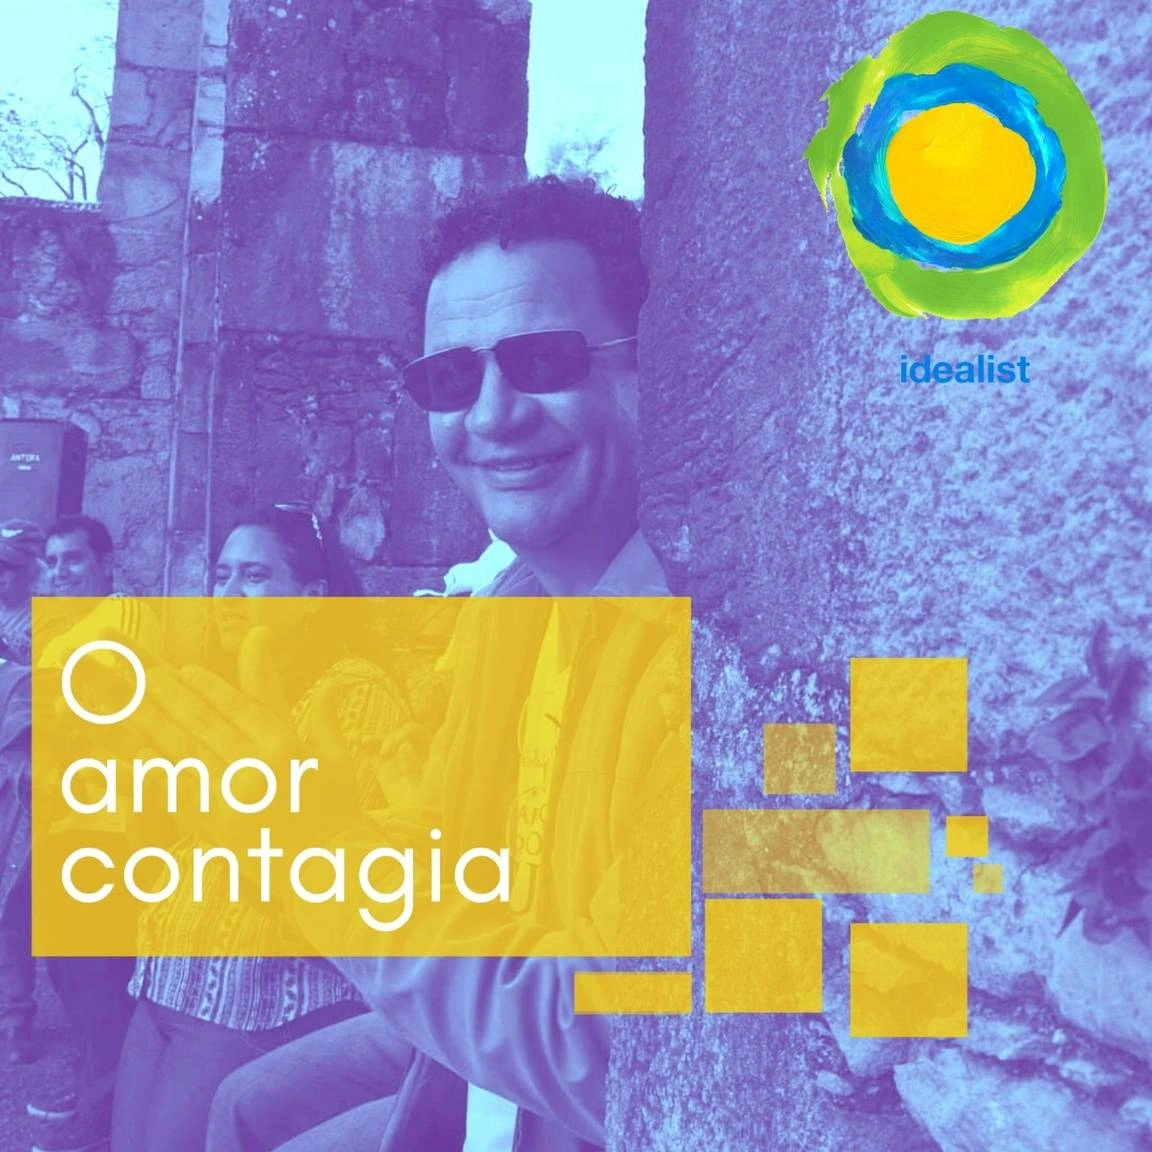 Ênio Reis smiling in a technicolor picture with the words,"O amor contiga" imposed over him.